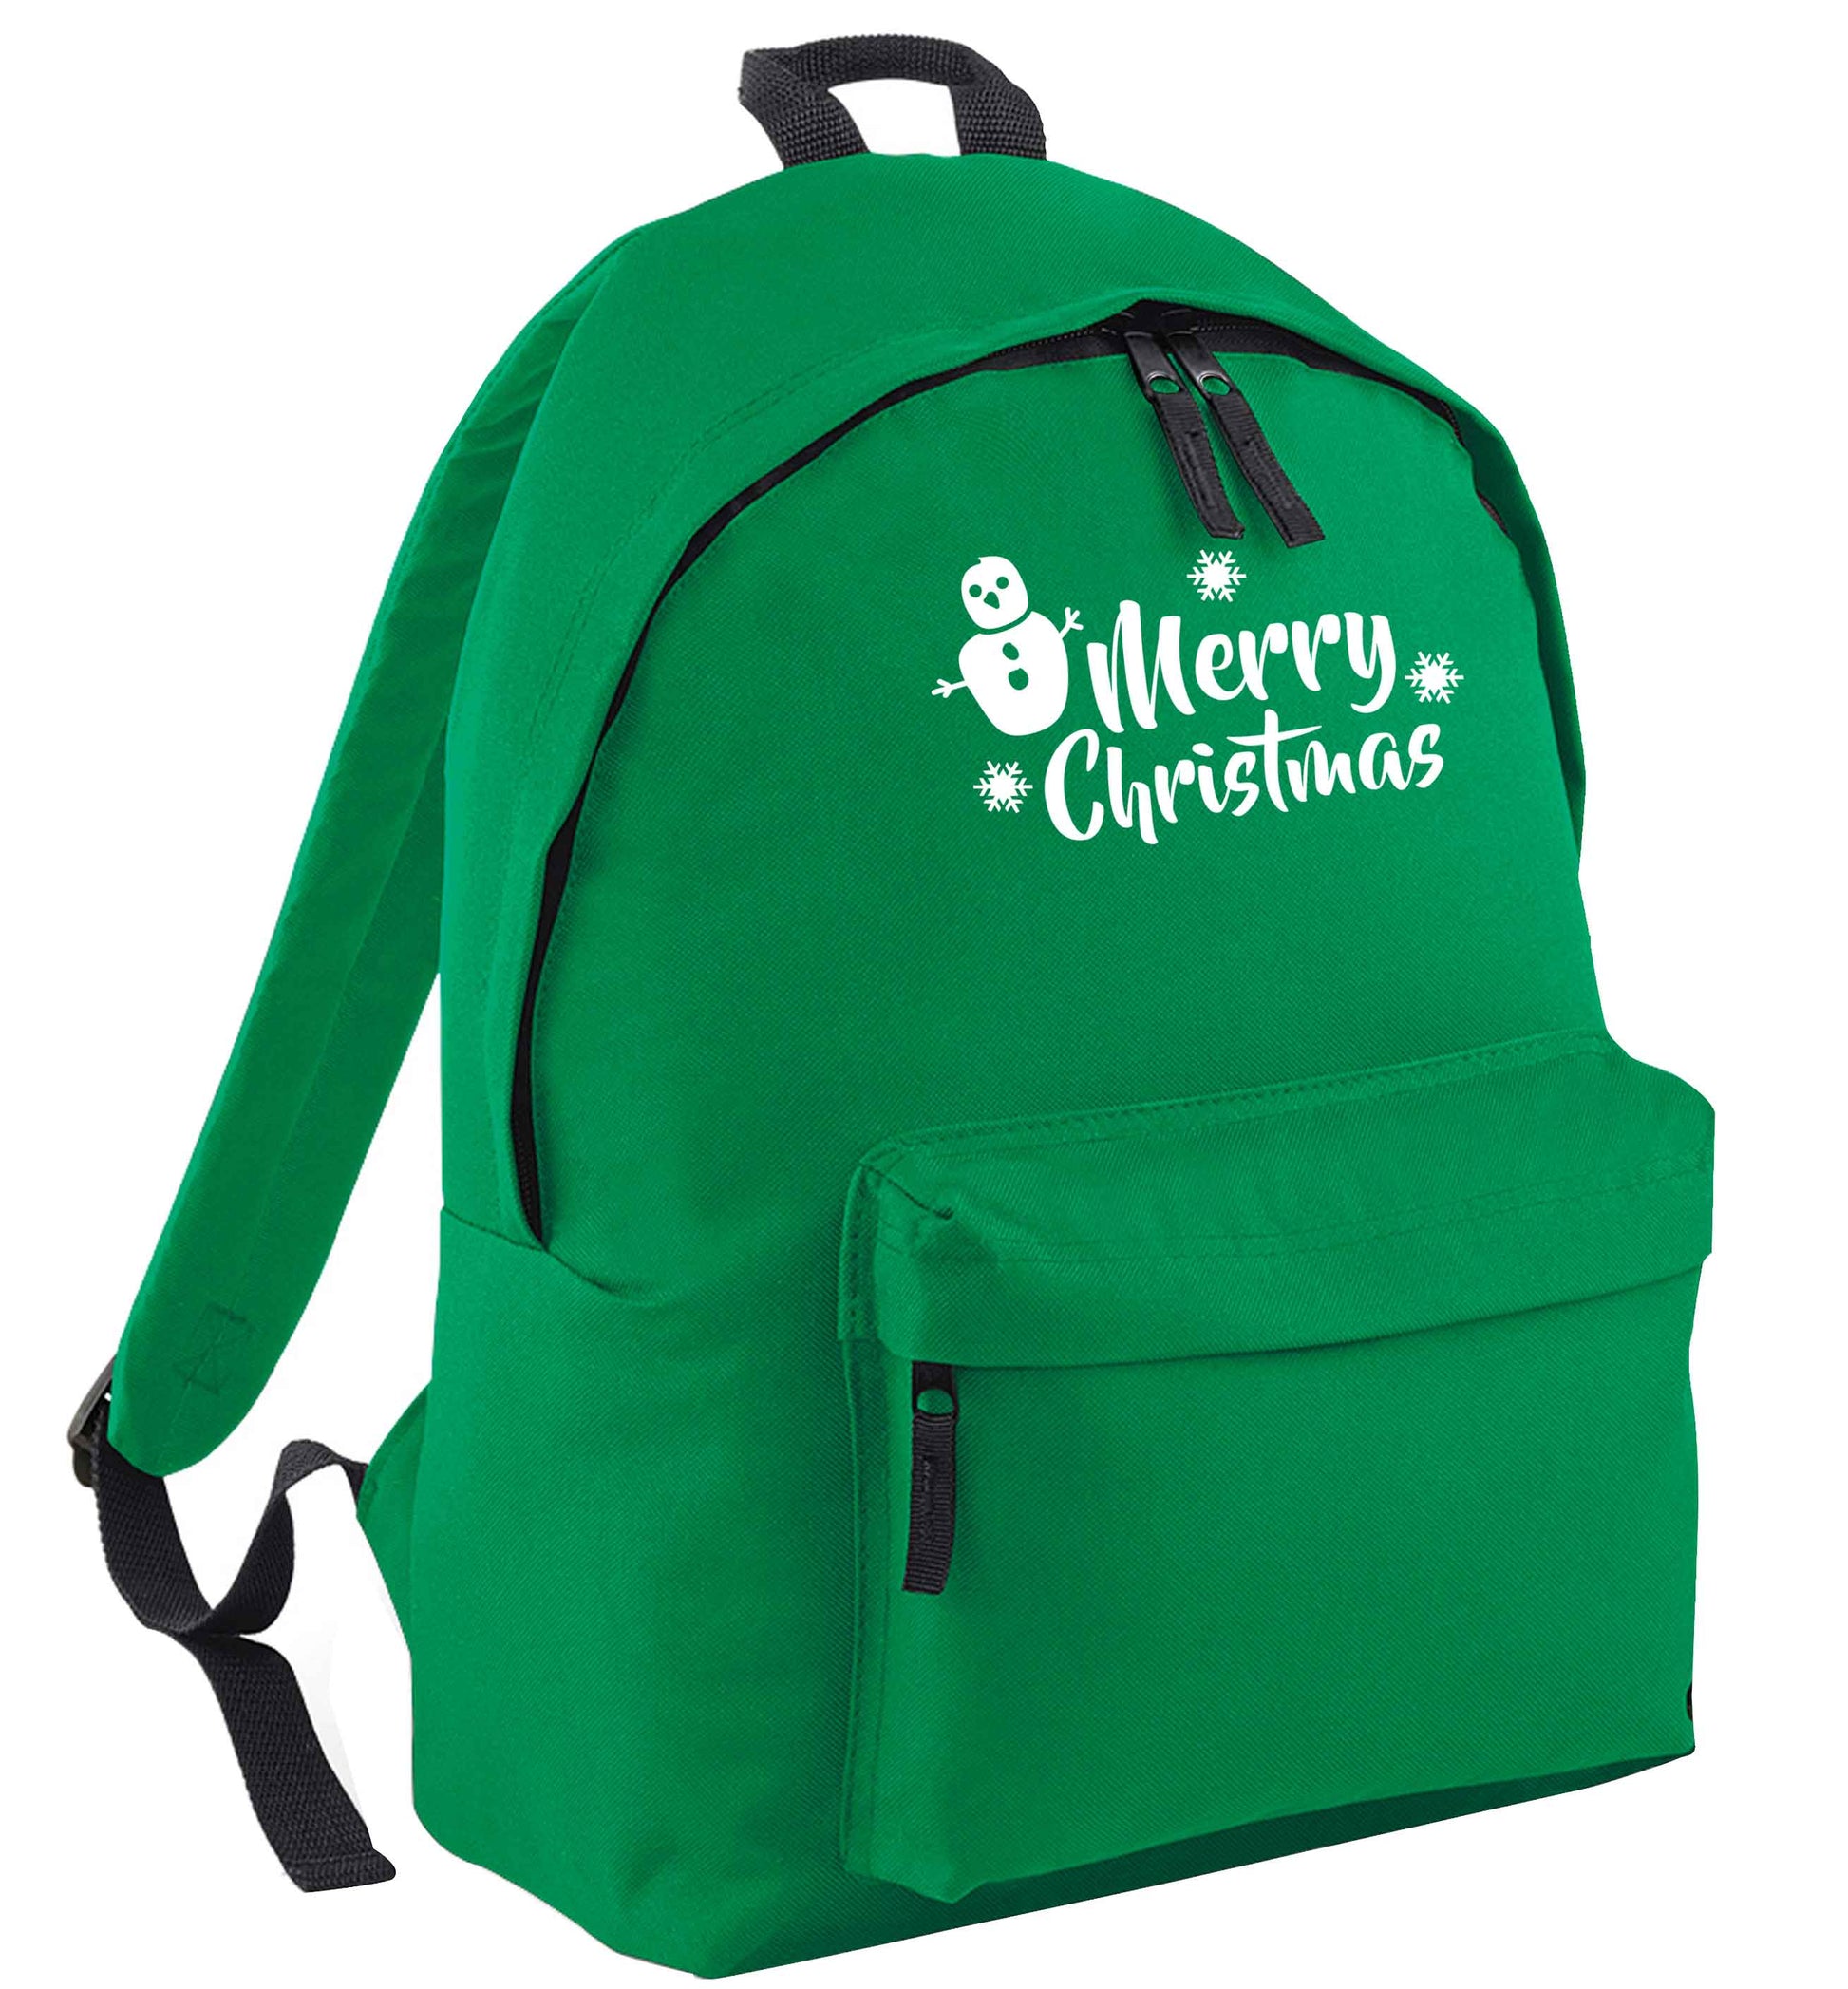 Merry Christmas - snowman green adults backpack